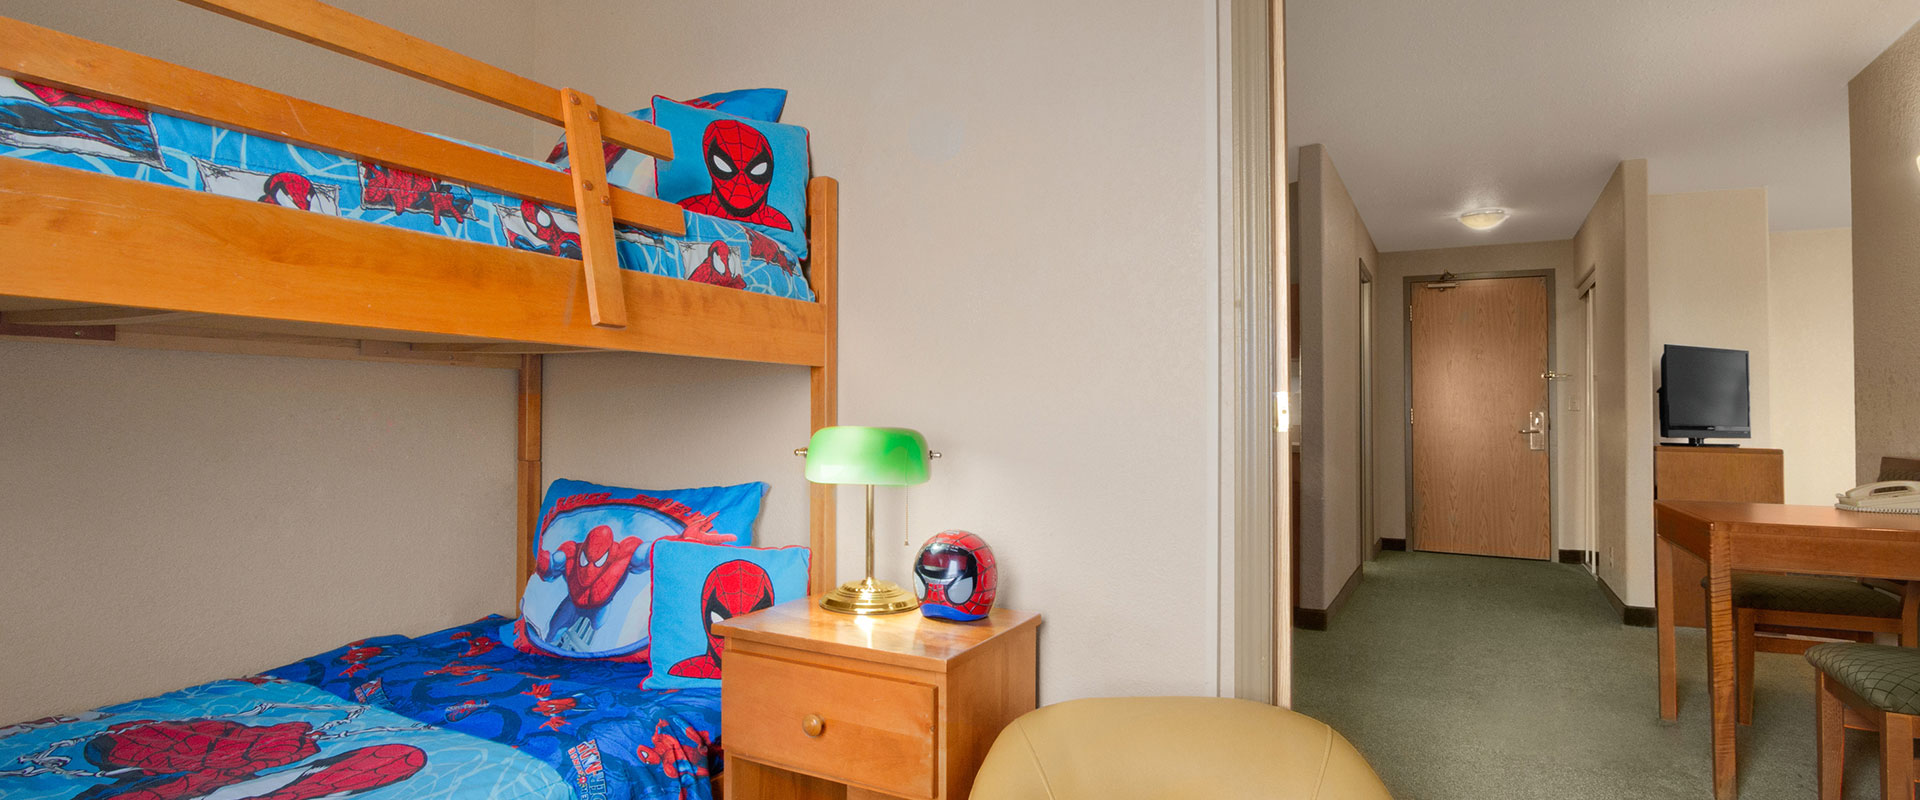 Large sized view of a kid friendly suite featuring bunk beds with Spiderman bed linen and pillows at Days Inn Red Deer, Alberta.
